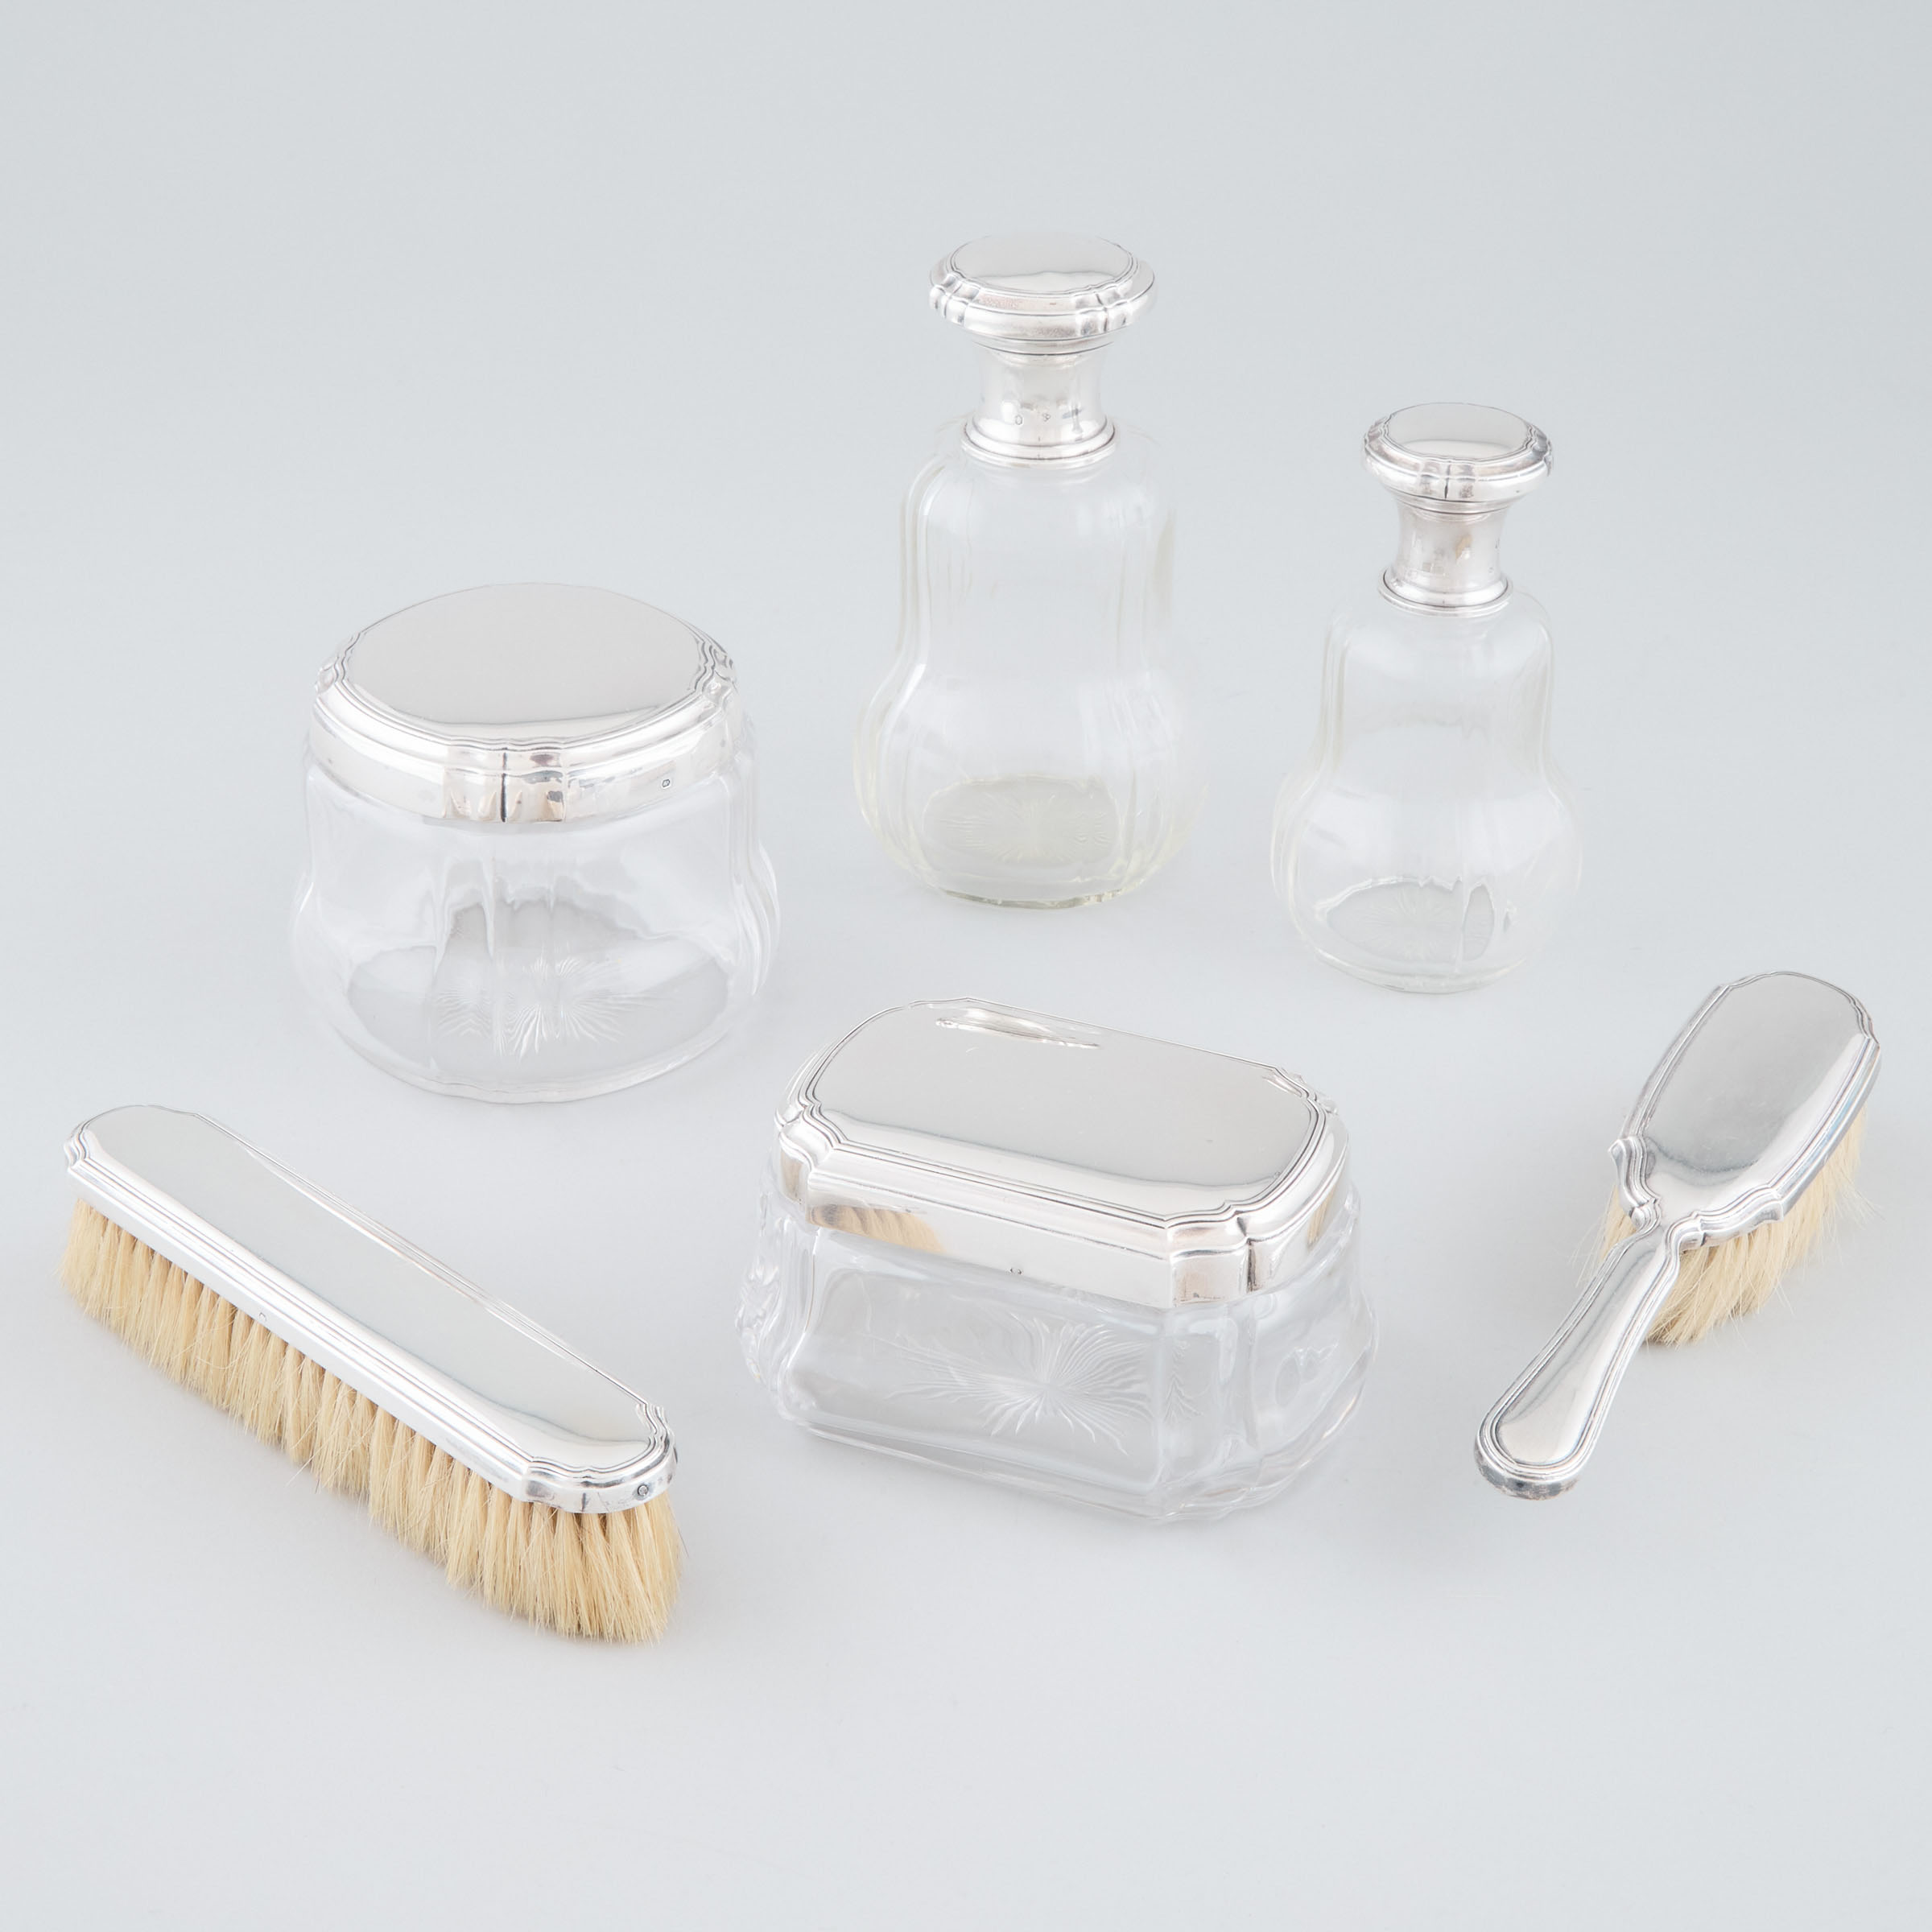 French Silver and Cut Glass Dressing Table Set, Louis Ravinet & Cie., Paris, 20th century